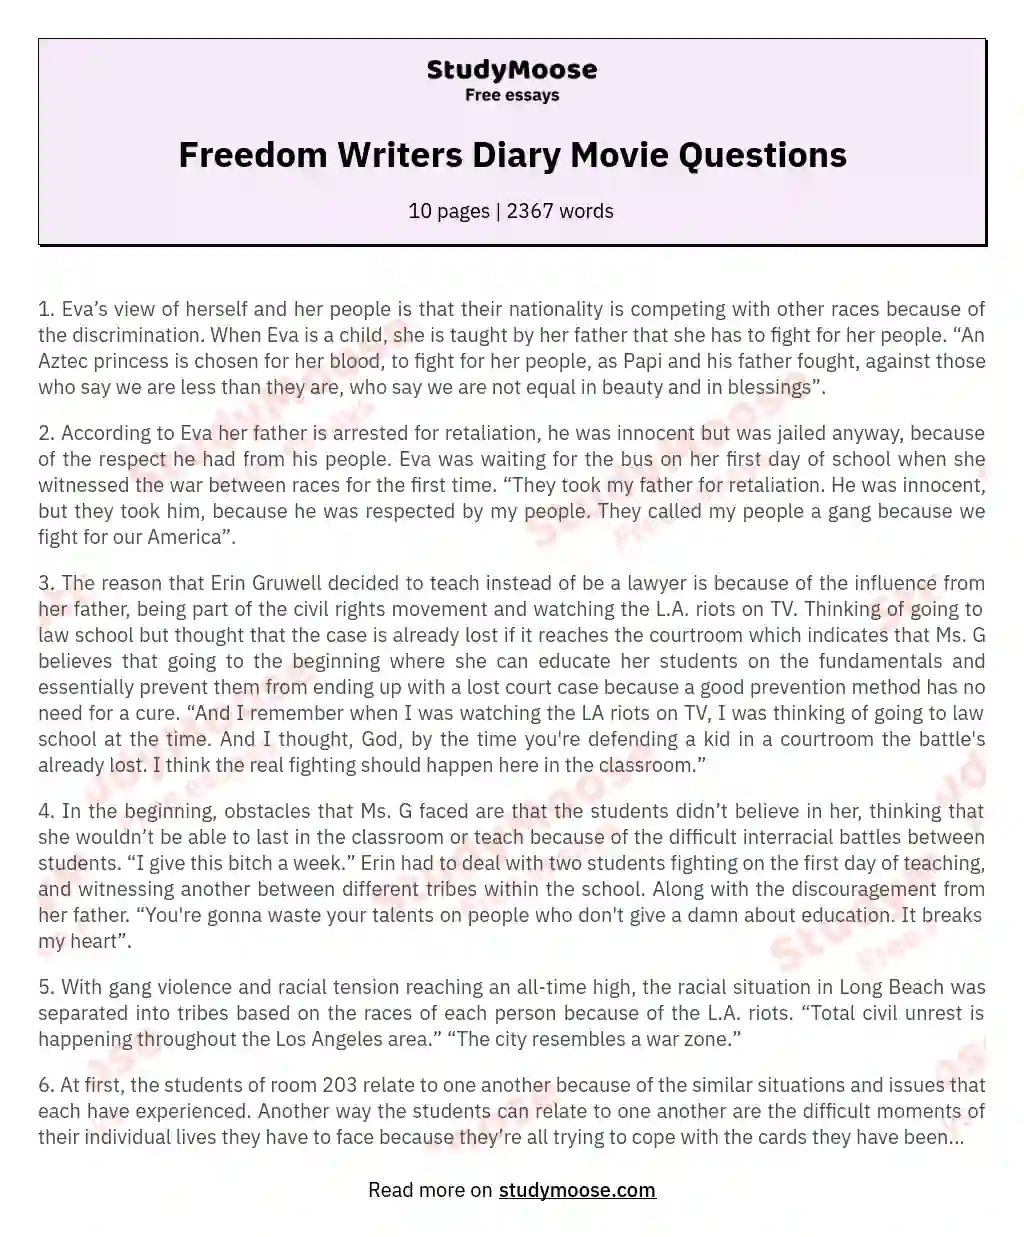 Freedom Writers Diary Movie Questions essay